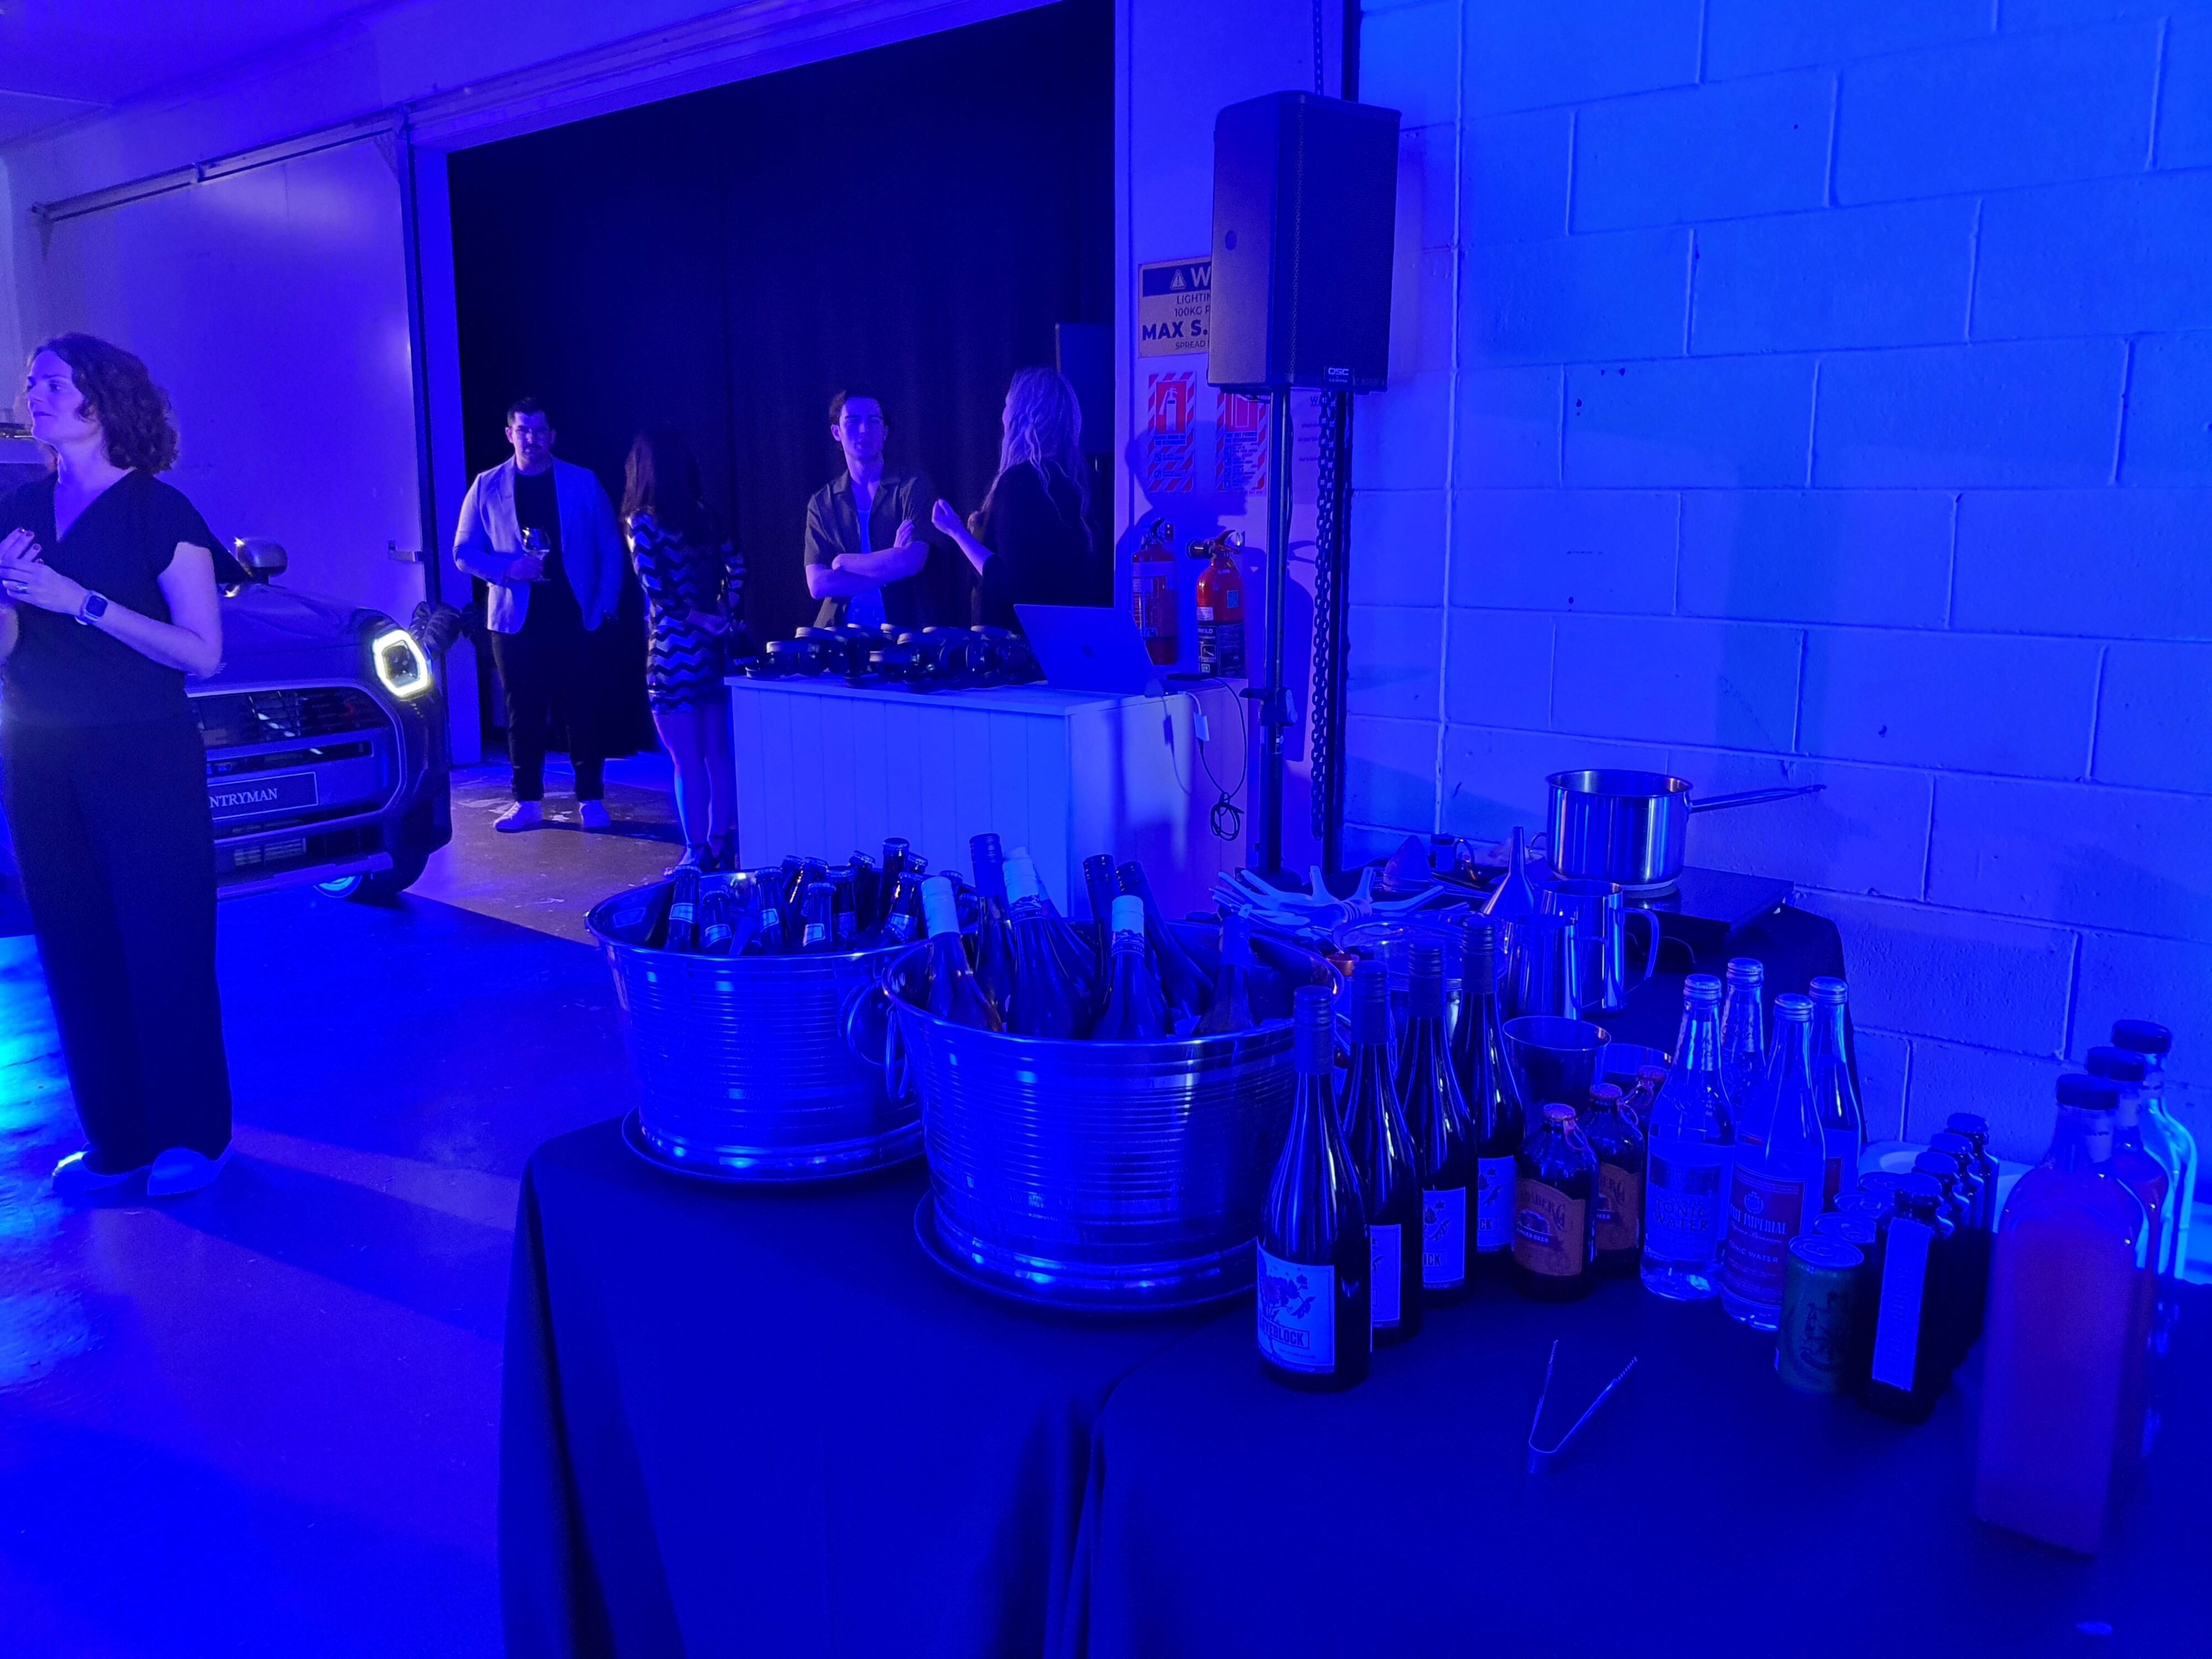 A photo of the inside of Studio 230, Ponsoby with a bar full of drinks, prepared for the unveiling of Mini's new design language.